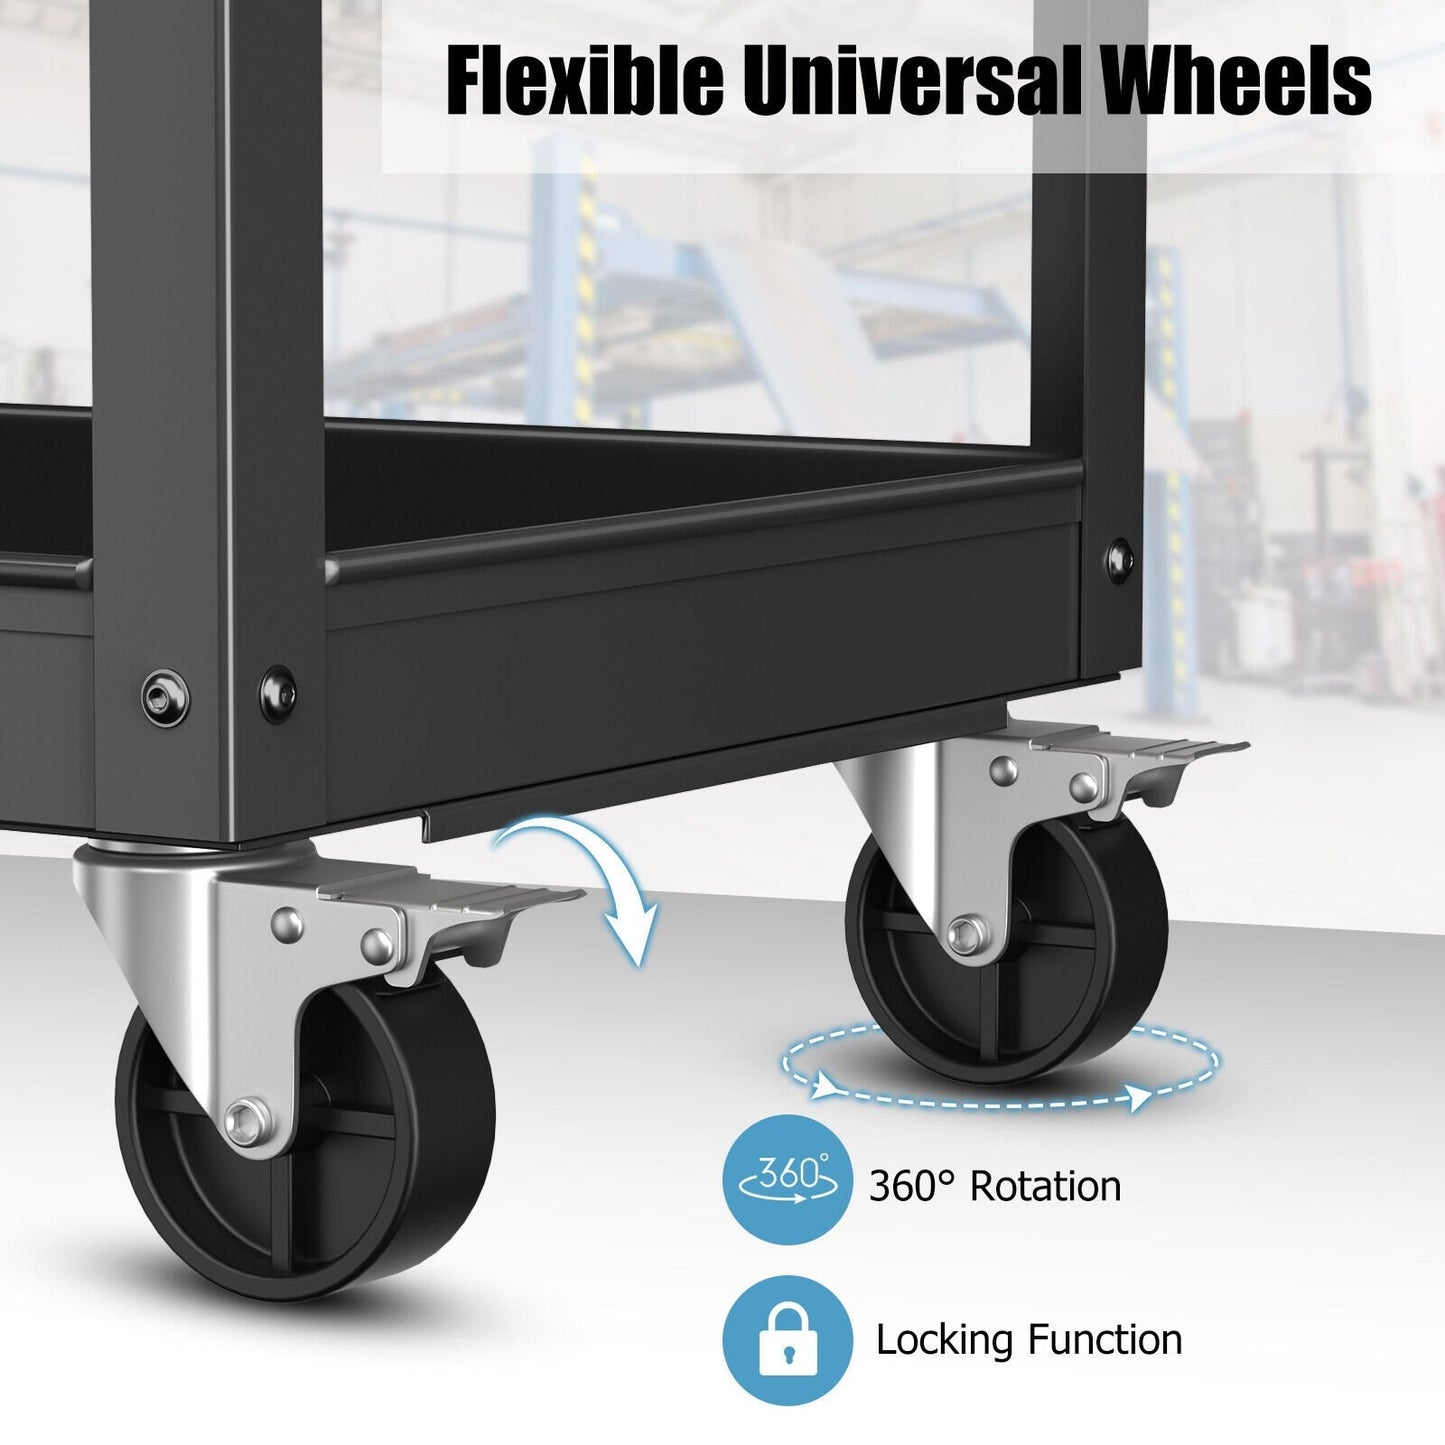 3-Tier Metal Utility Cart Trolley Tool with Flat Handle and 2 Lockable Universal Wheels, Black